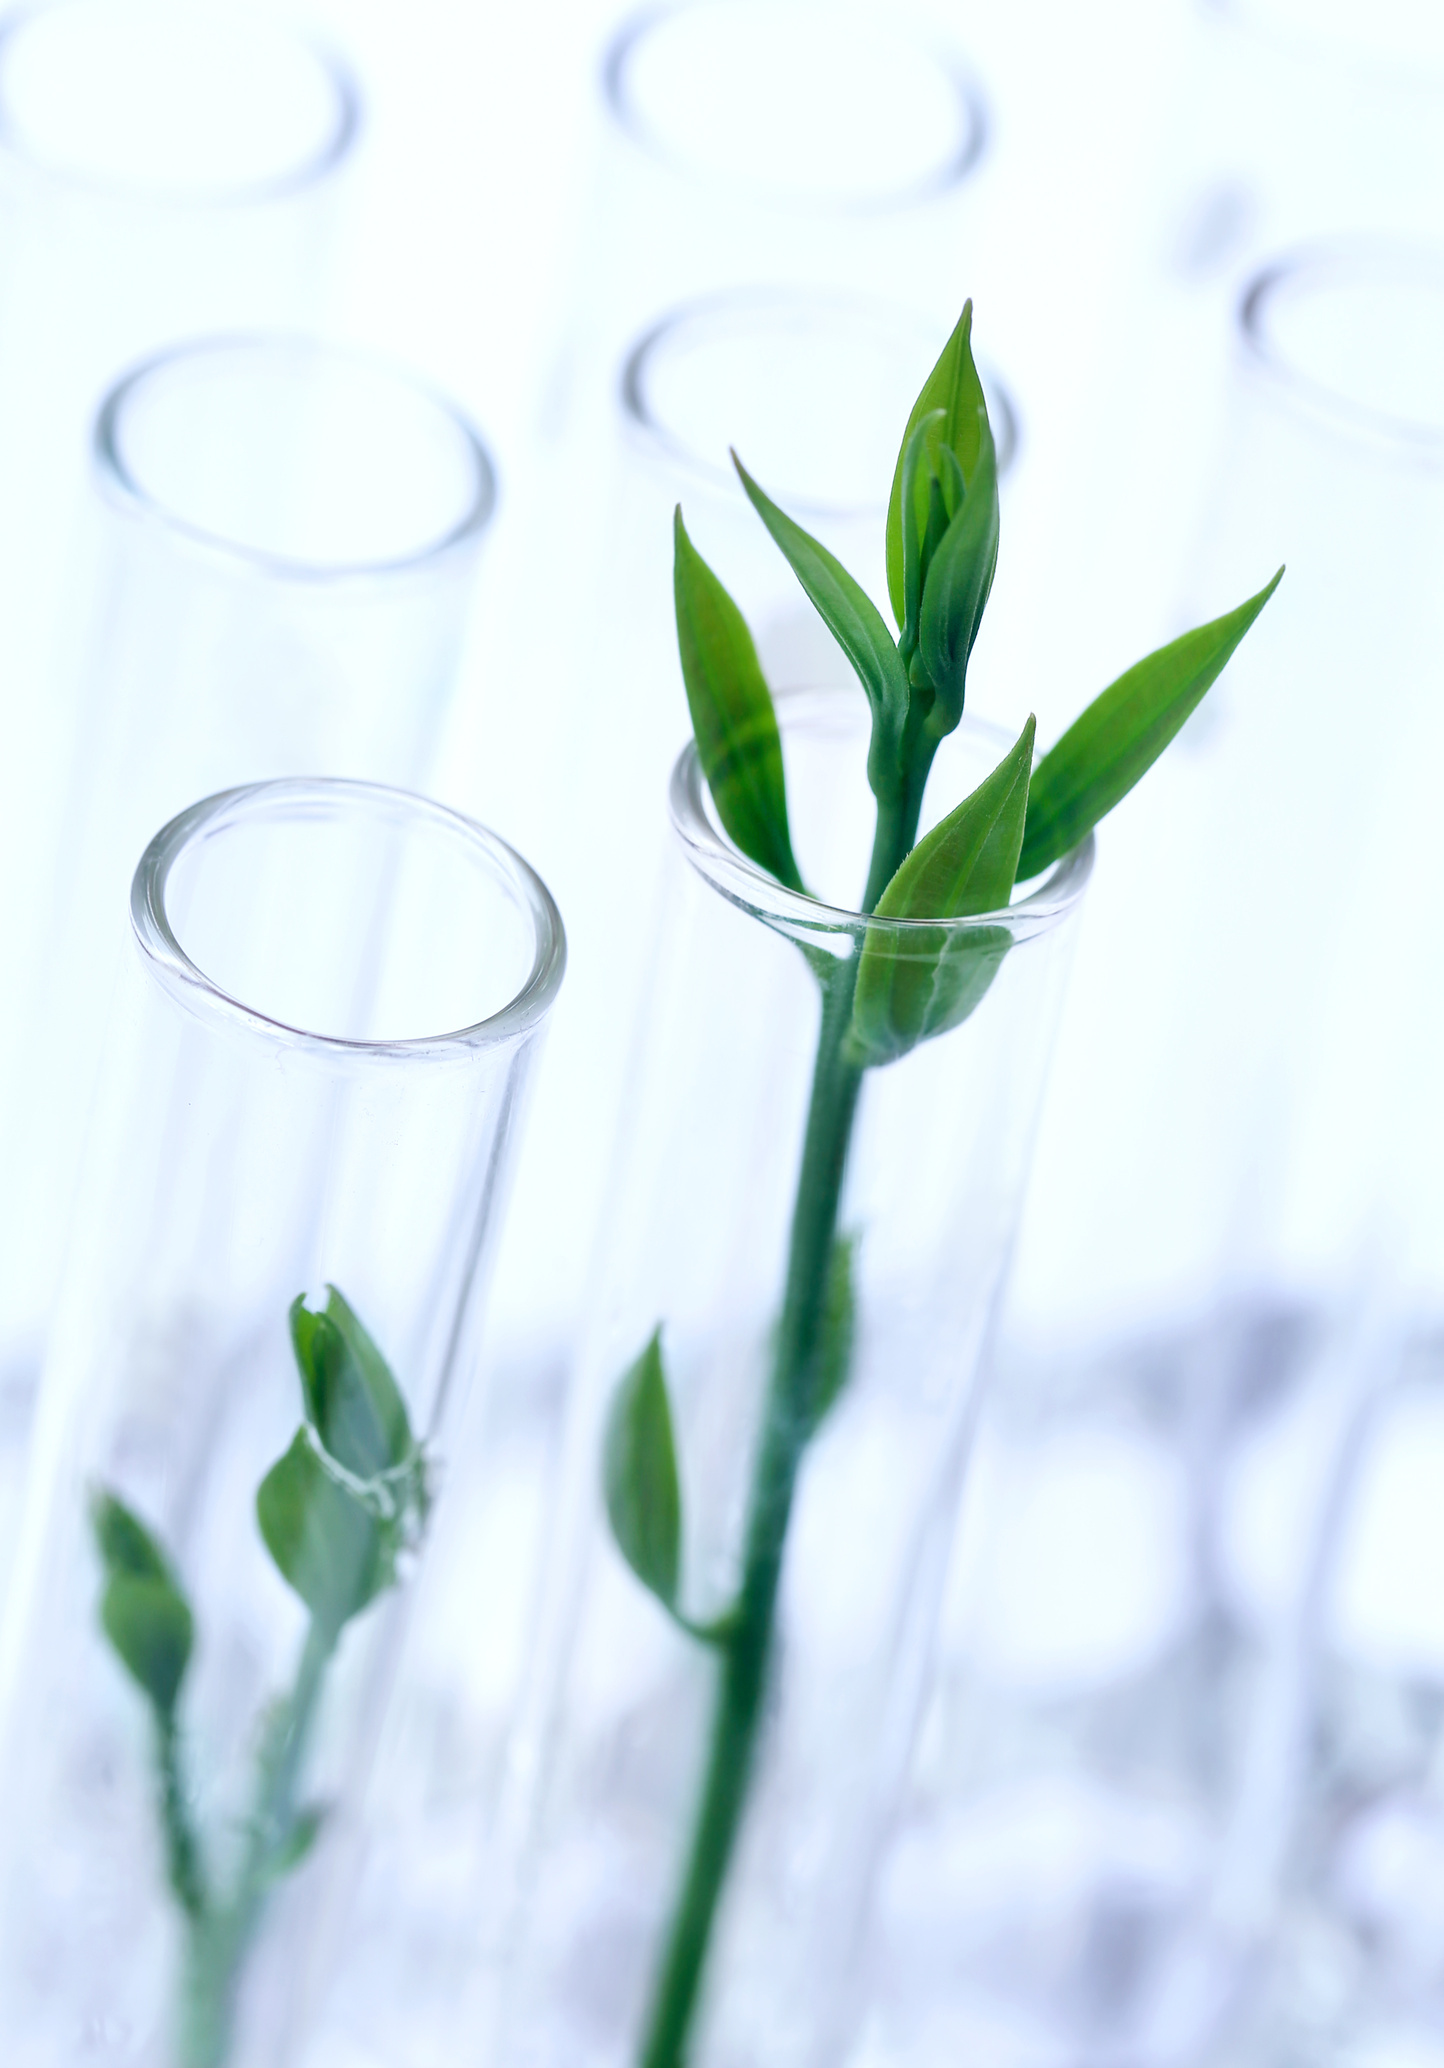 Tissue Cultured Plant in Test Tube